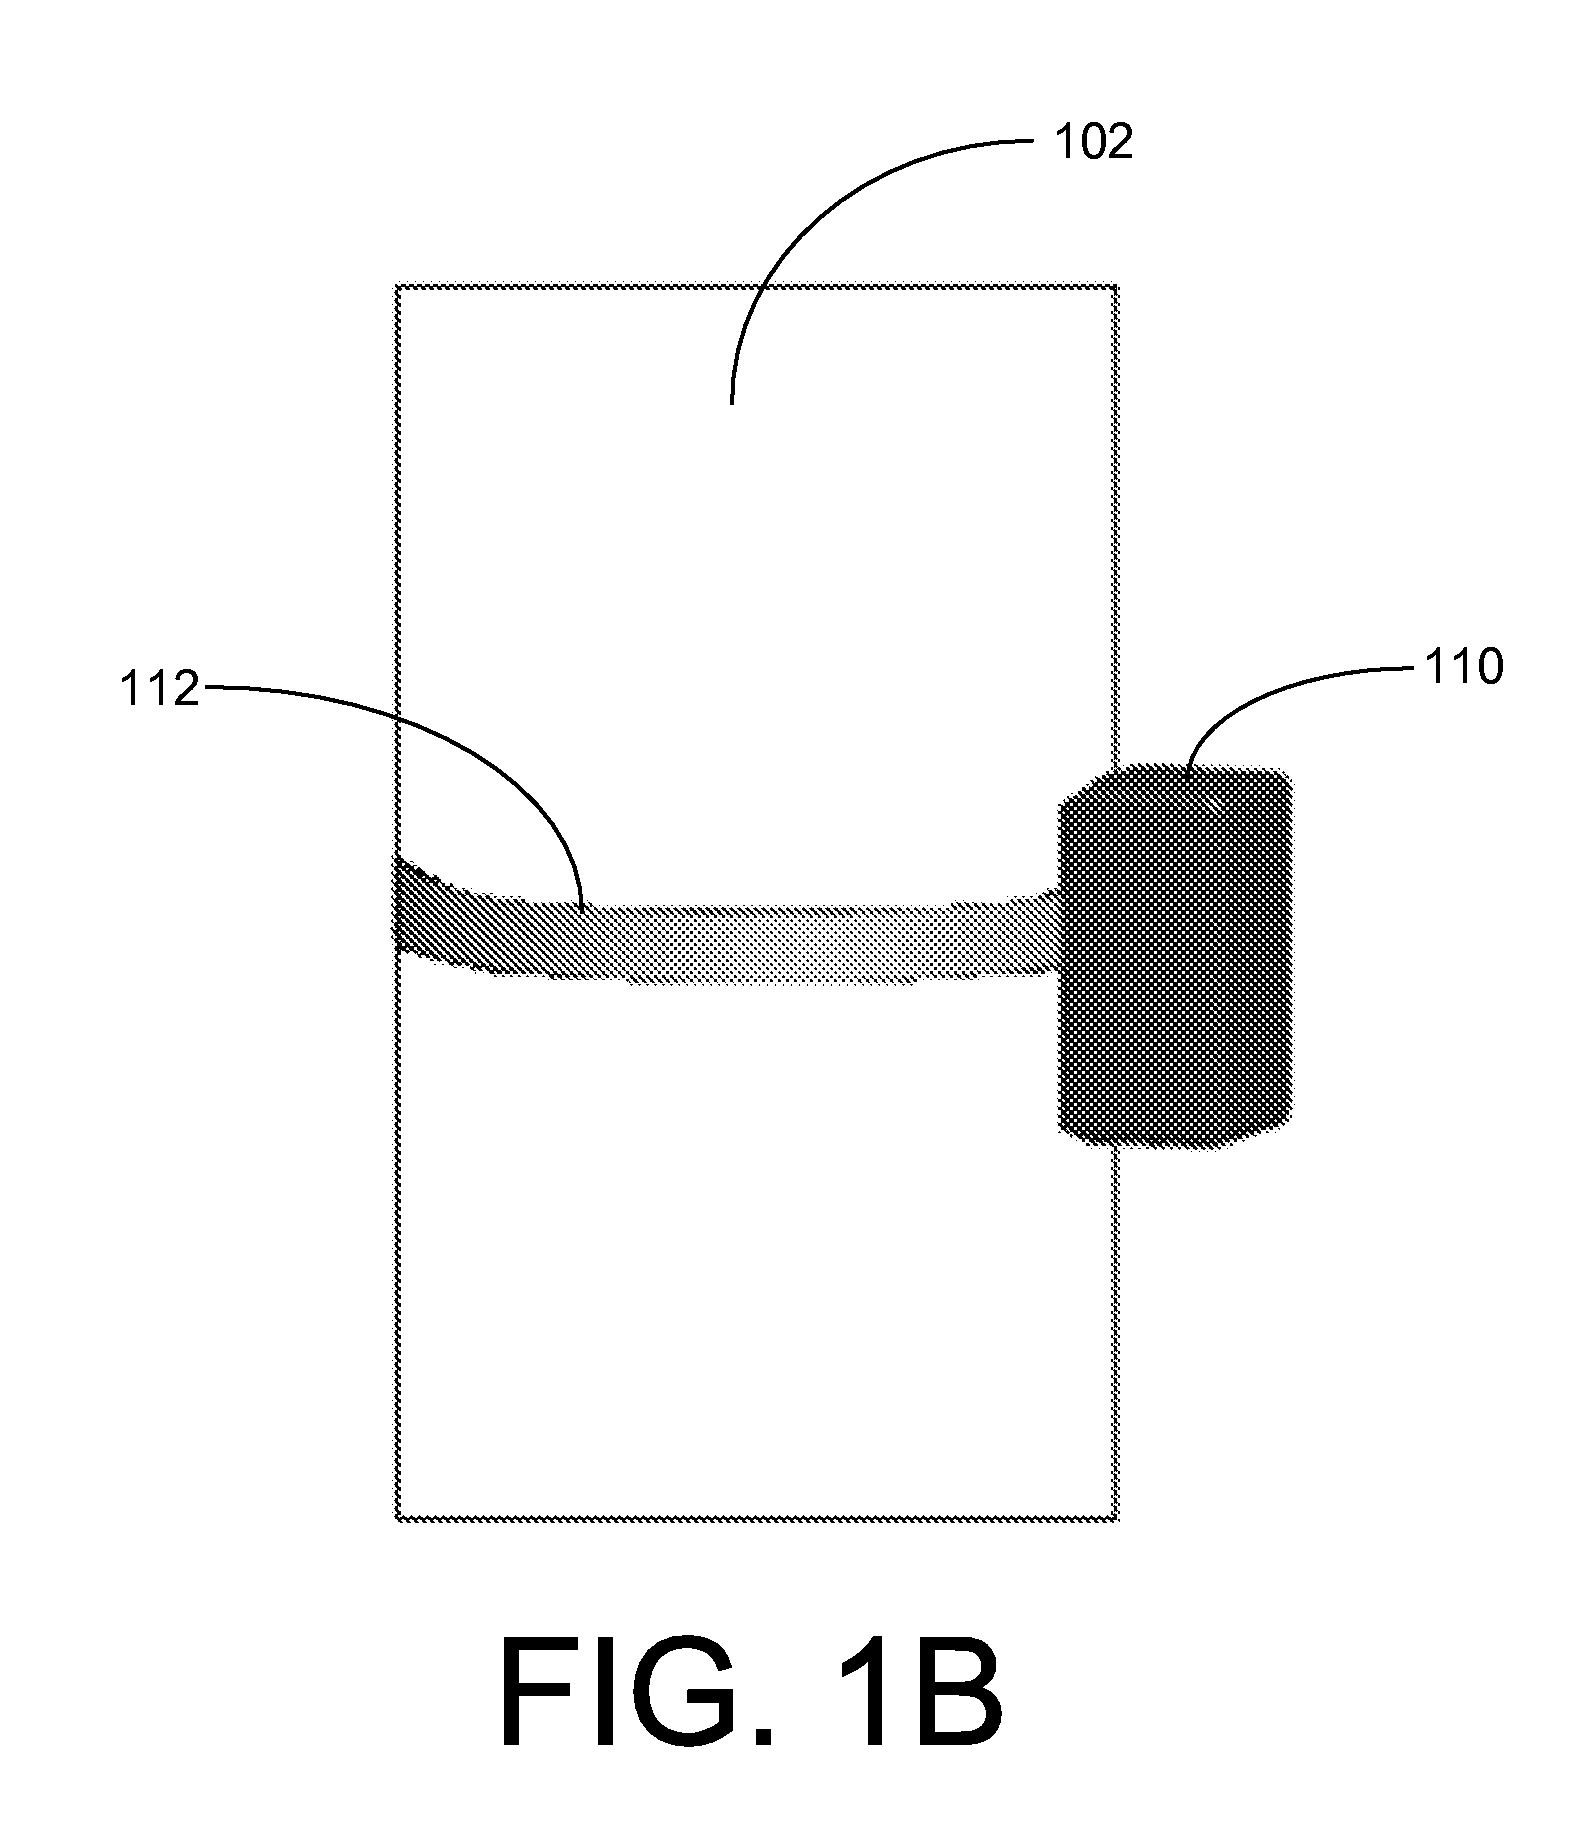 Systems, Methods, and Apparatuses for Stray Voltage Detection